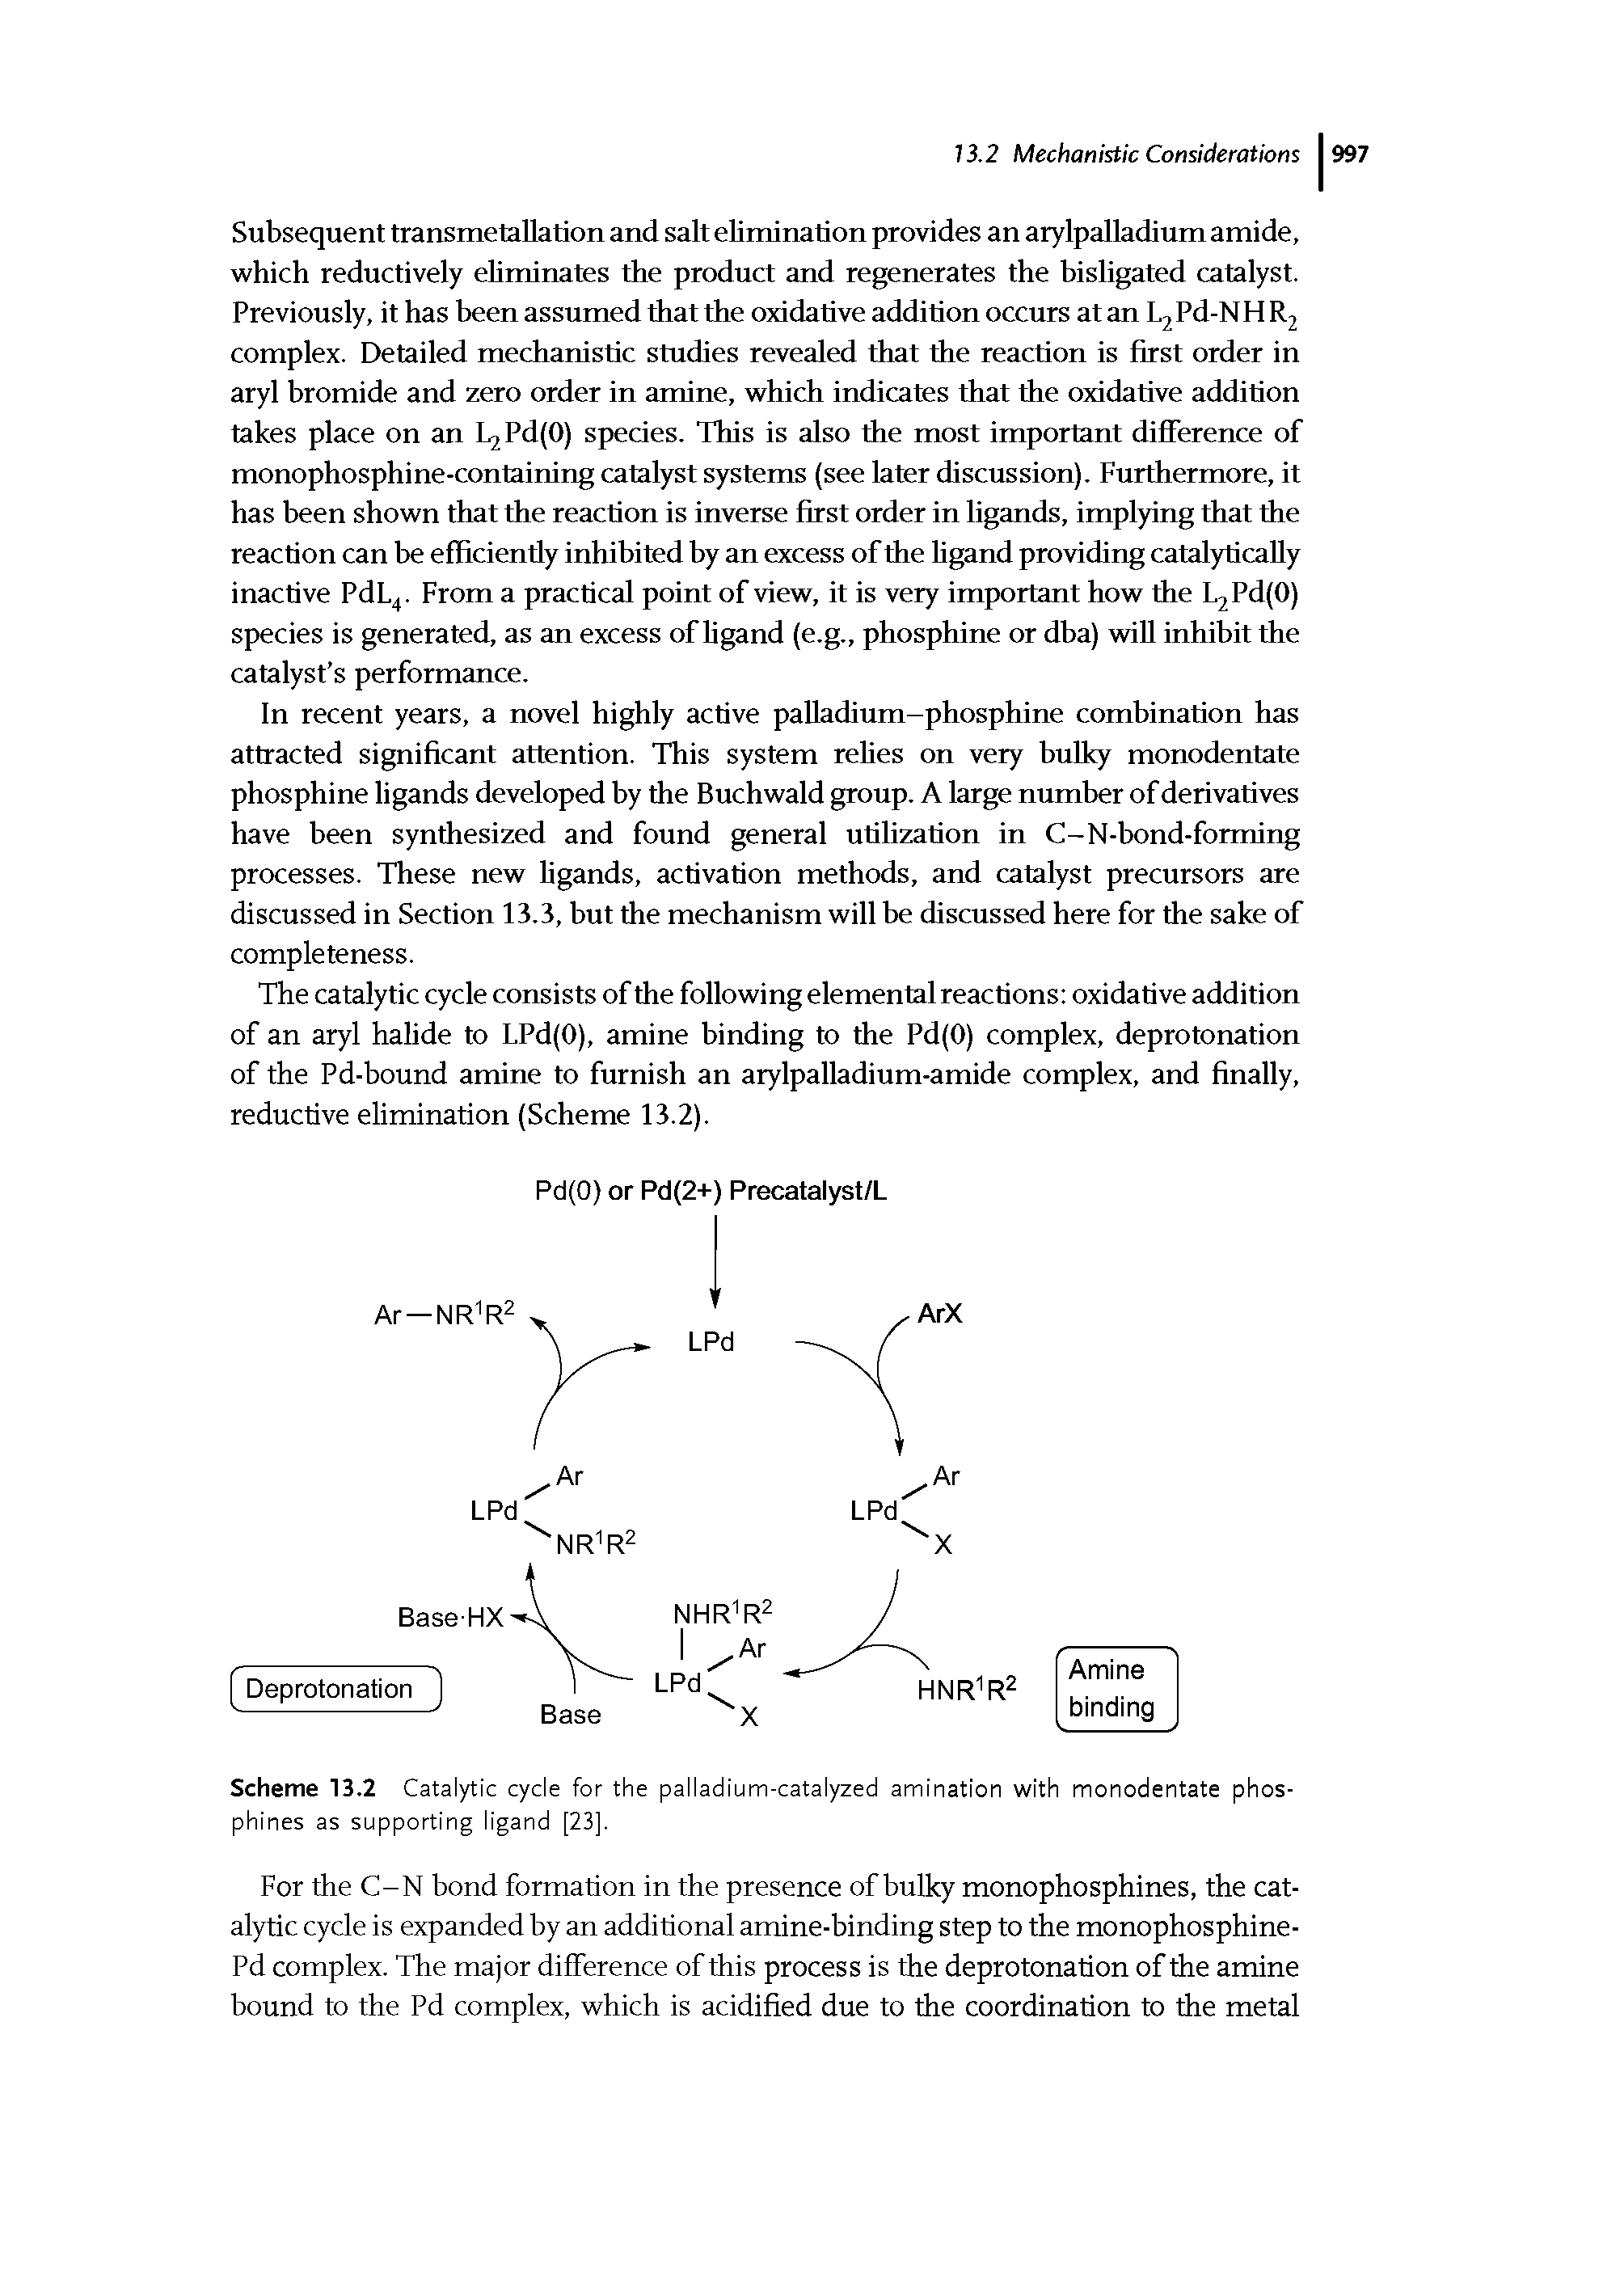 Scheme 13.2 Catalytic cycle for the palladium-catalyzed amination with monodentate phosphines as supporting ligand [23].